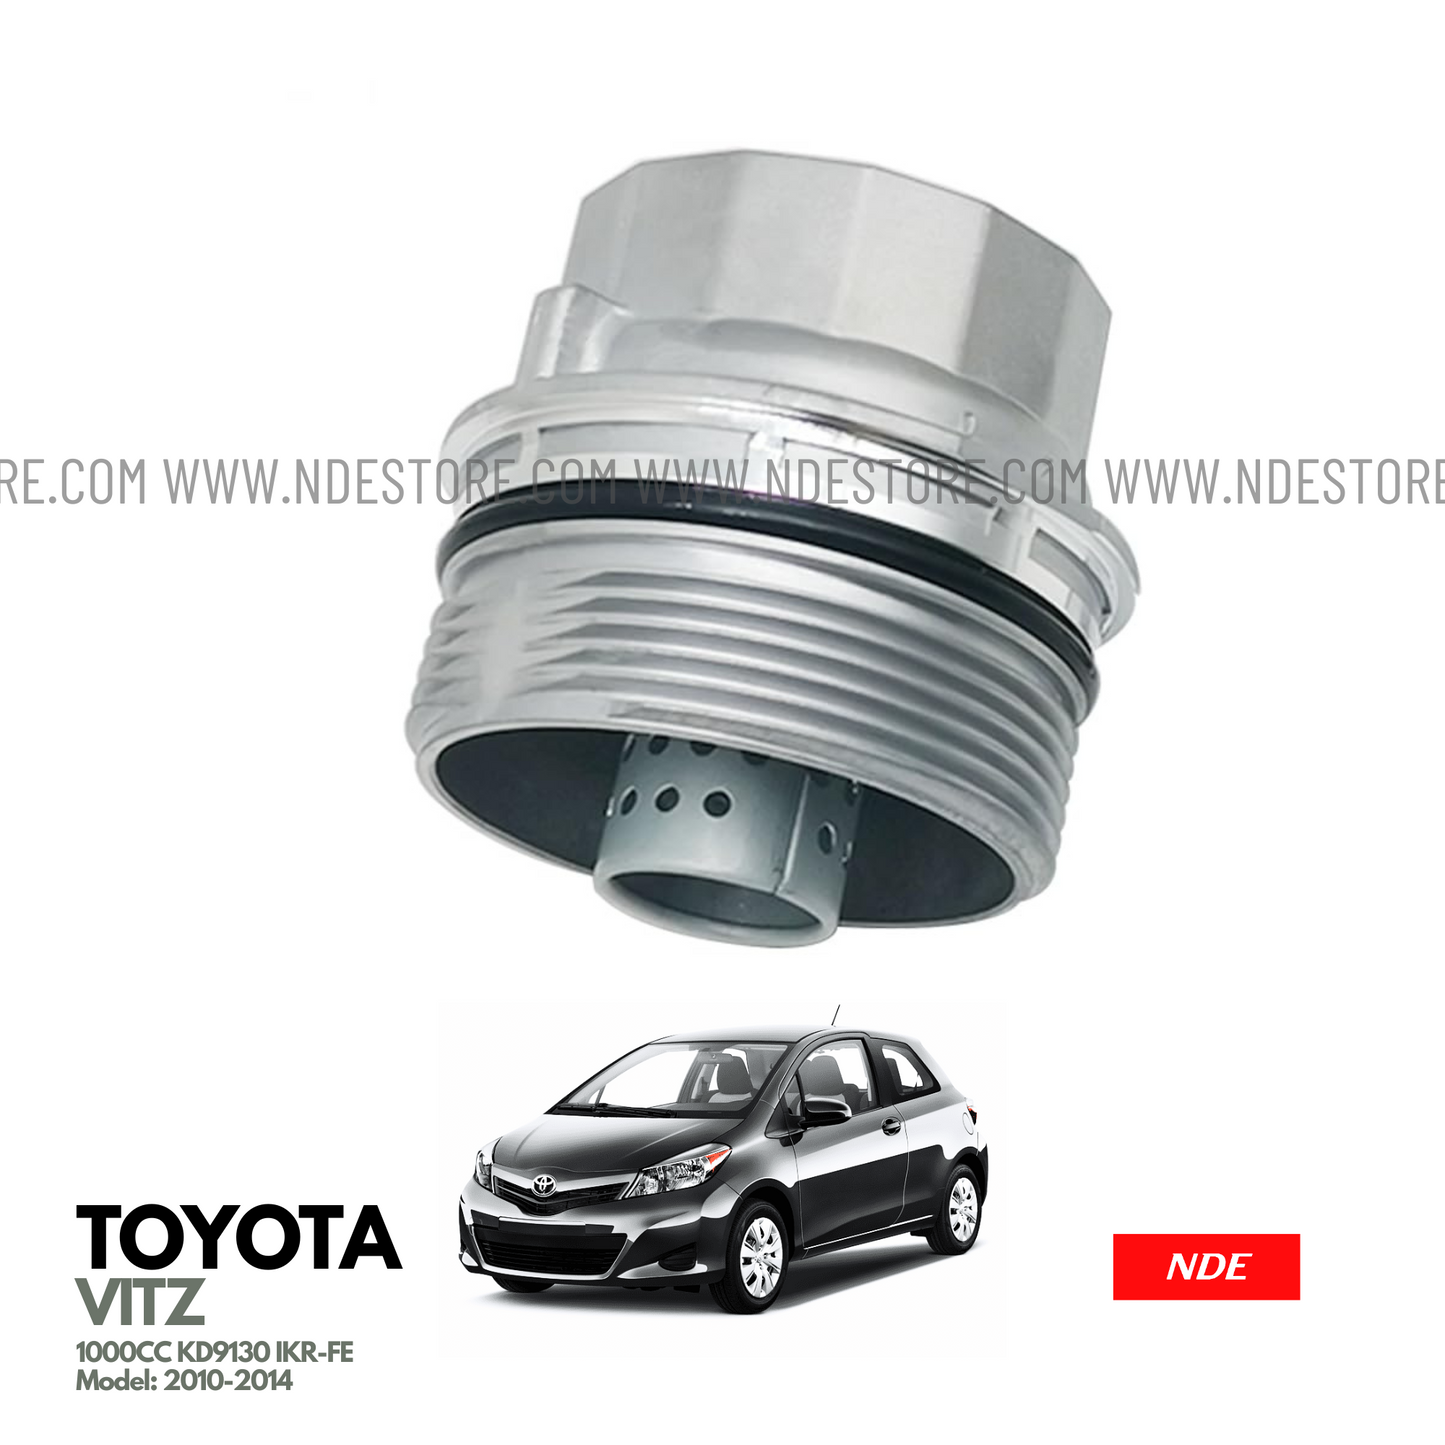 OIL FILTER CUP ASSY FOR TOYOTA VITZ 1000C (2010-2014)